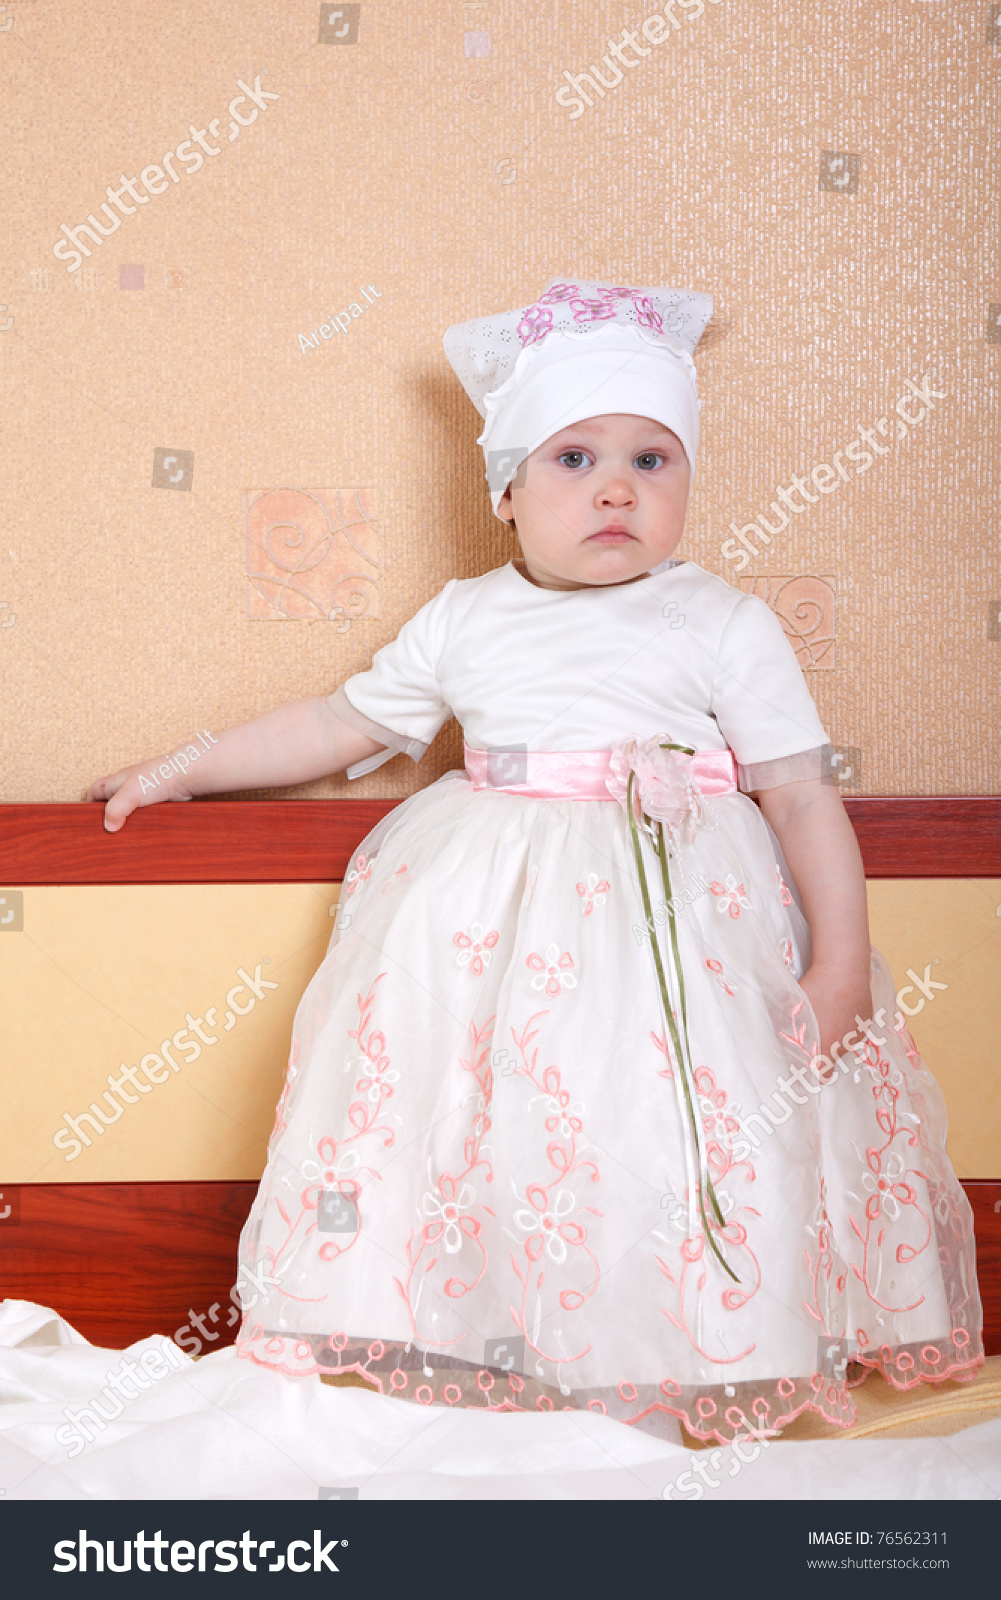 One Year Old Baby Girl Wearing White And Pink Dress Stock Photo 76562311 : Shutterstock